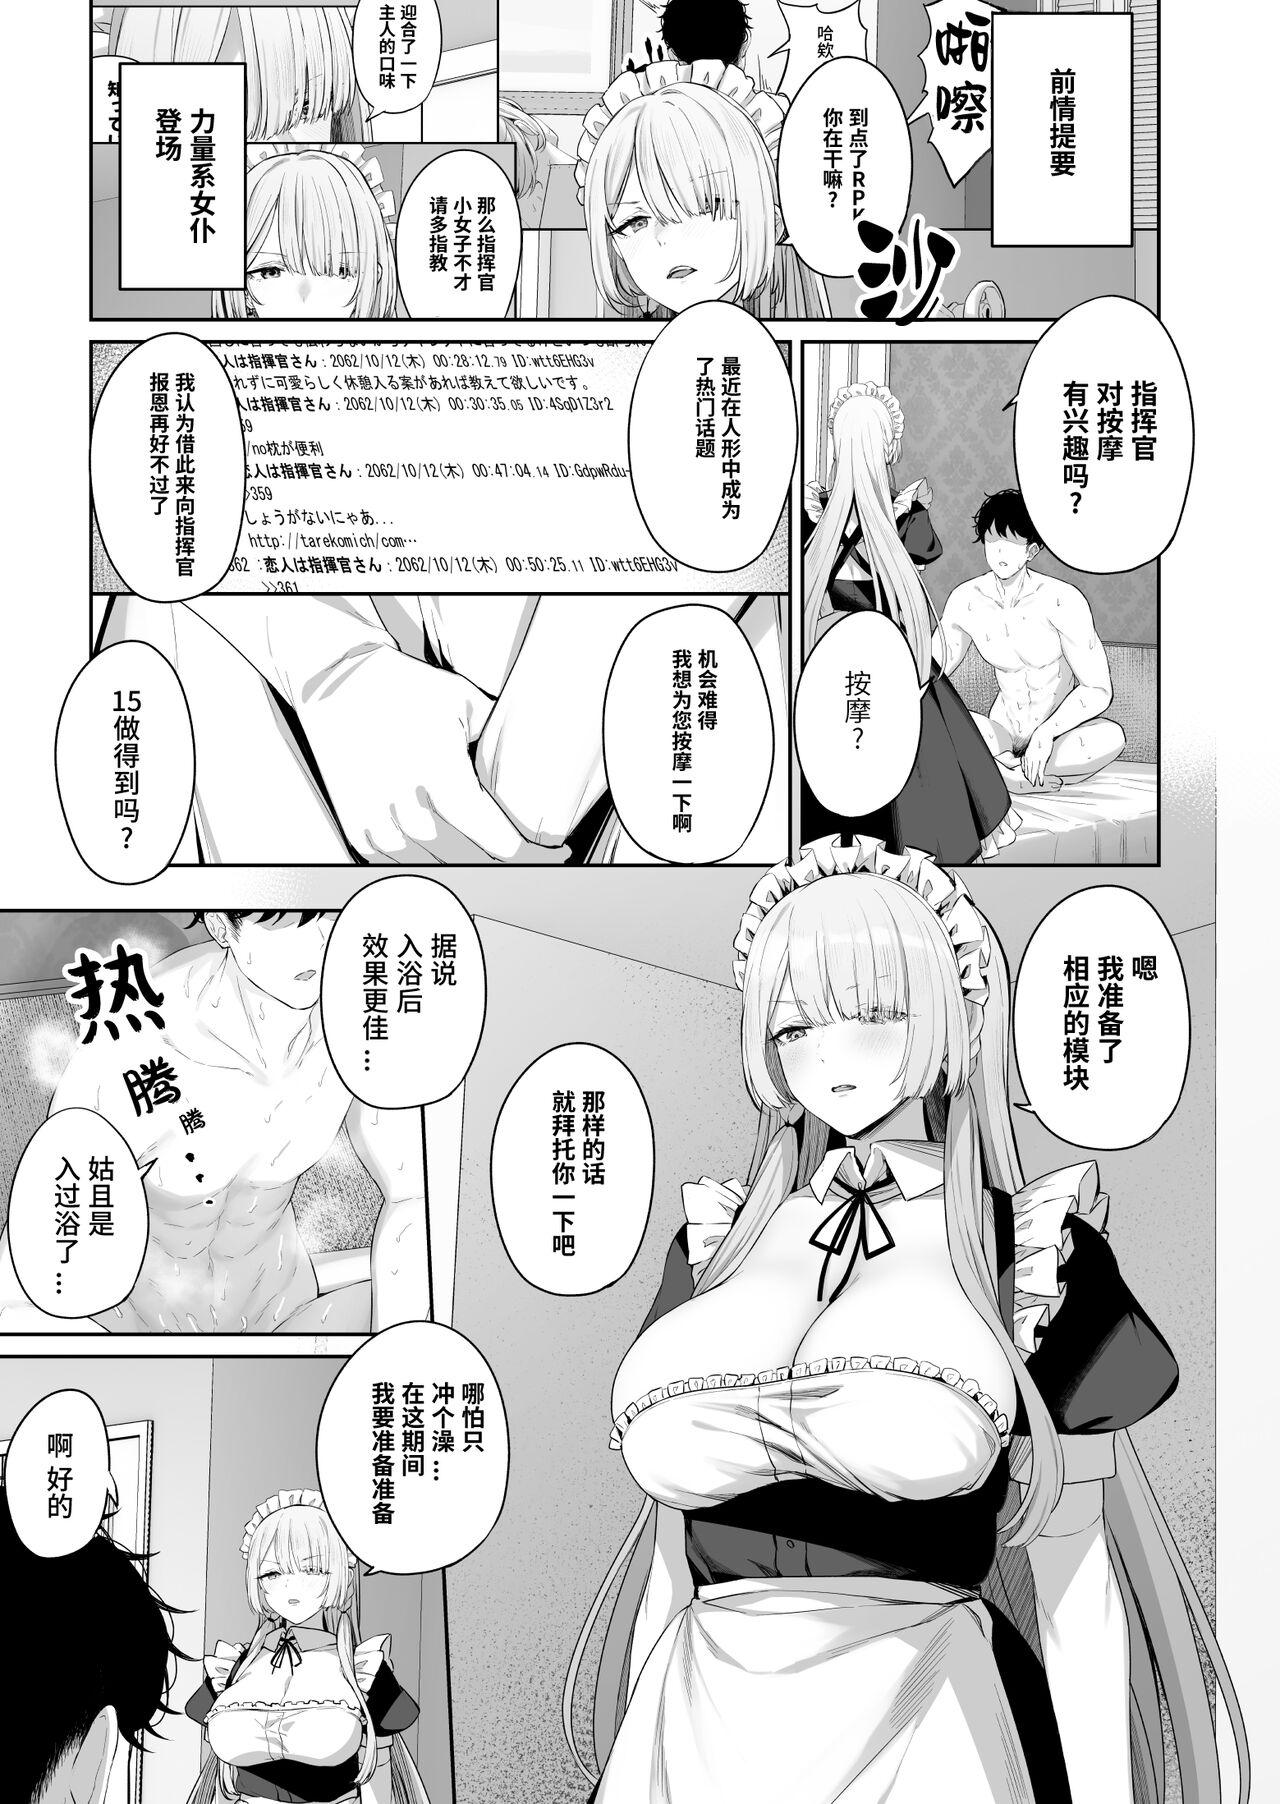 Pussyfucking AK15の進捗1 - Girls frontline Cameltoe - Page 2